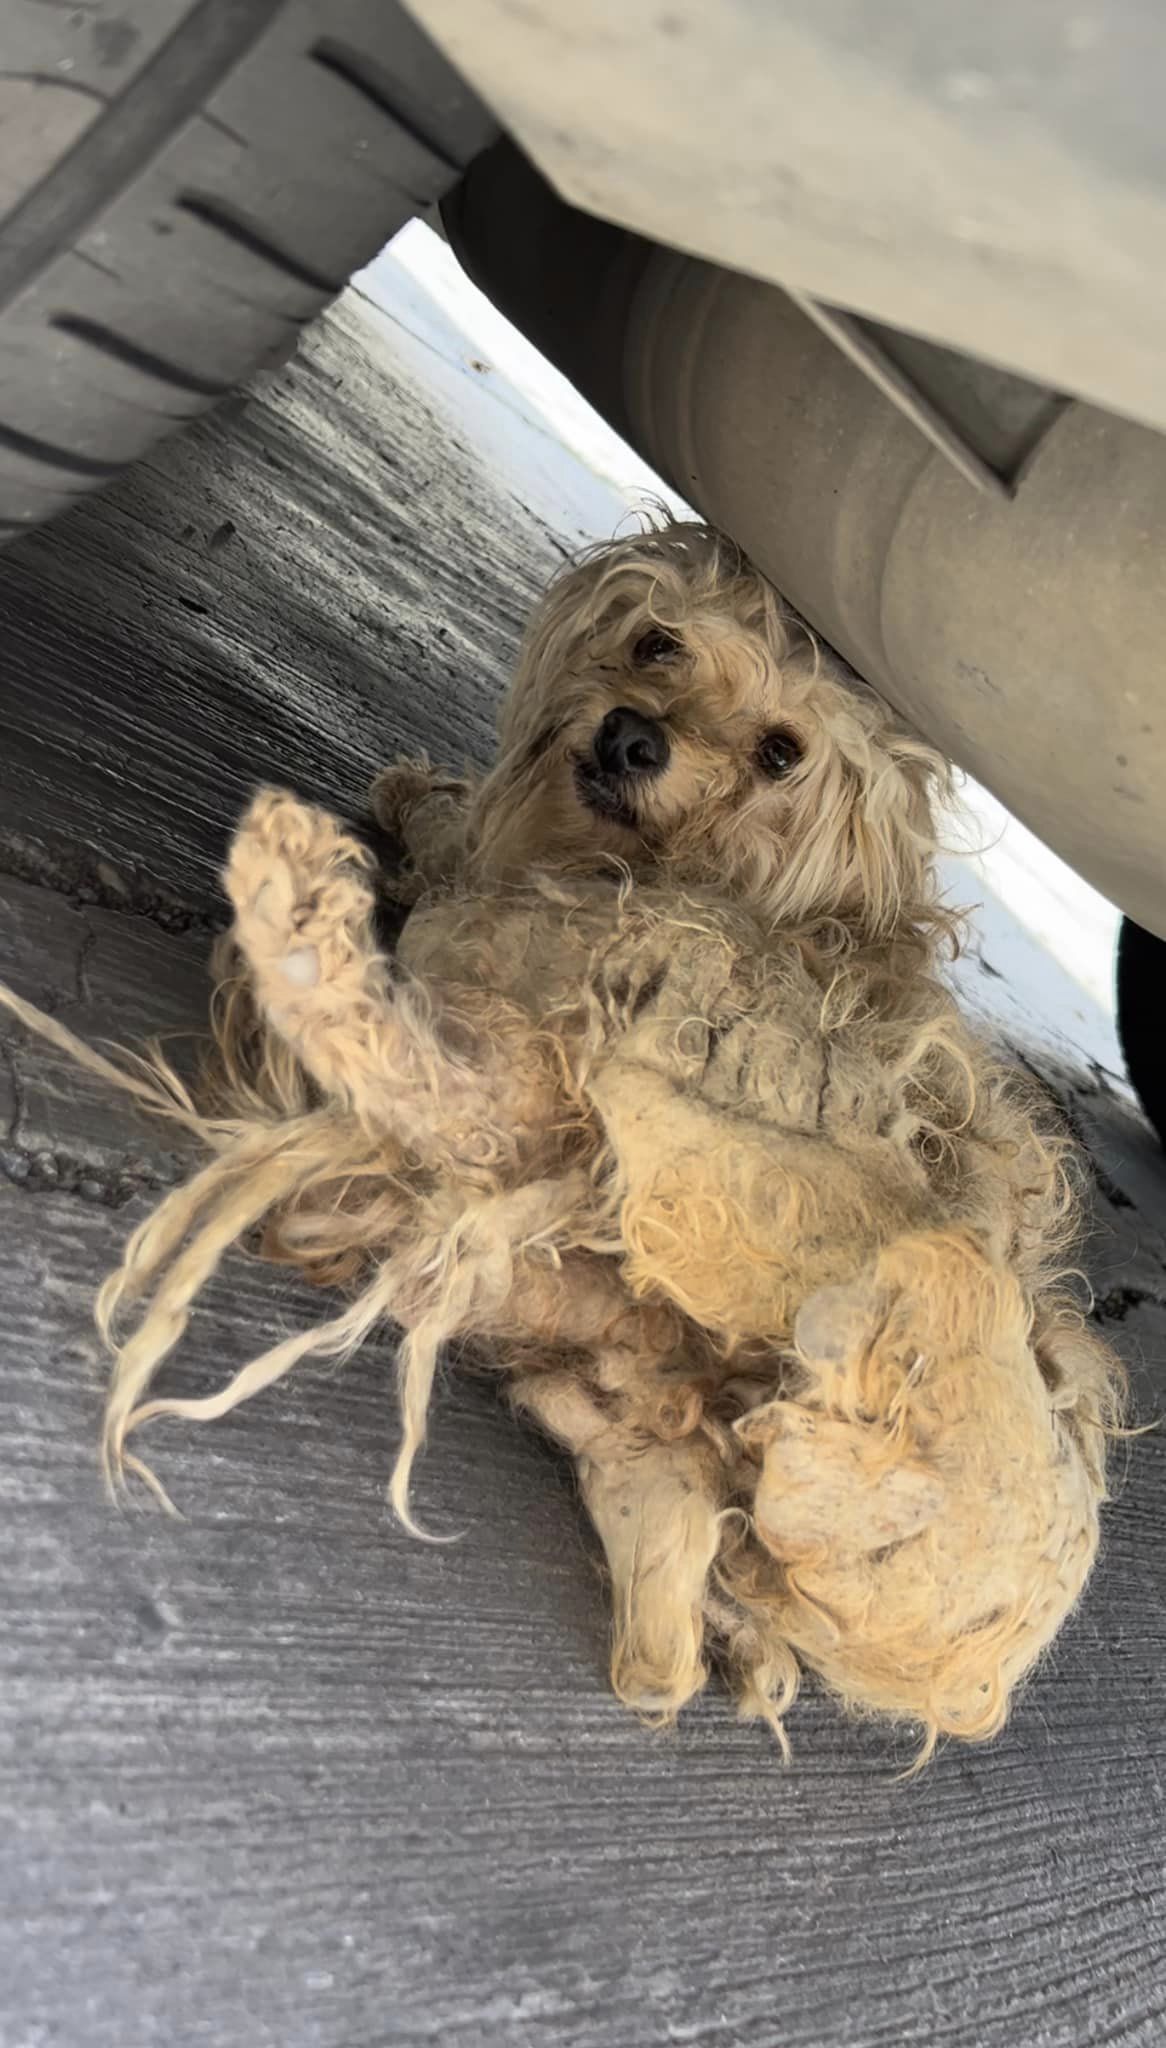 severely matted and injured dog